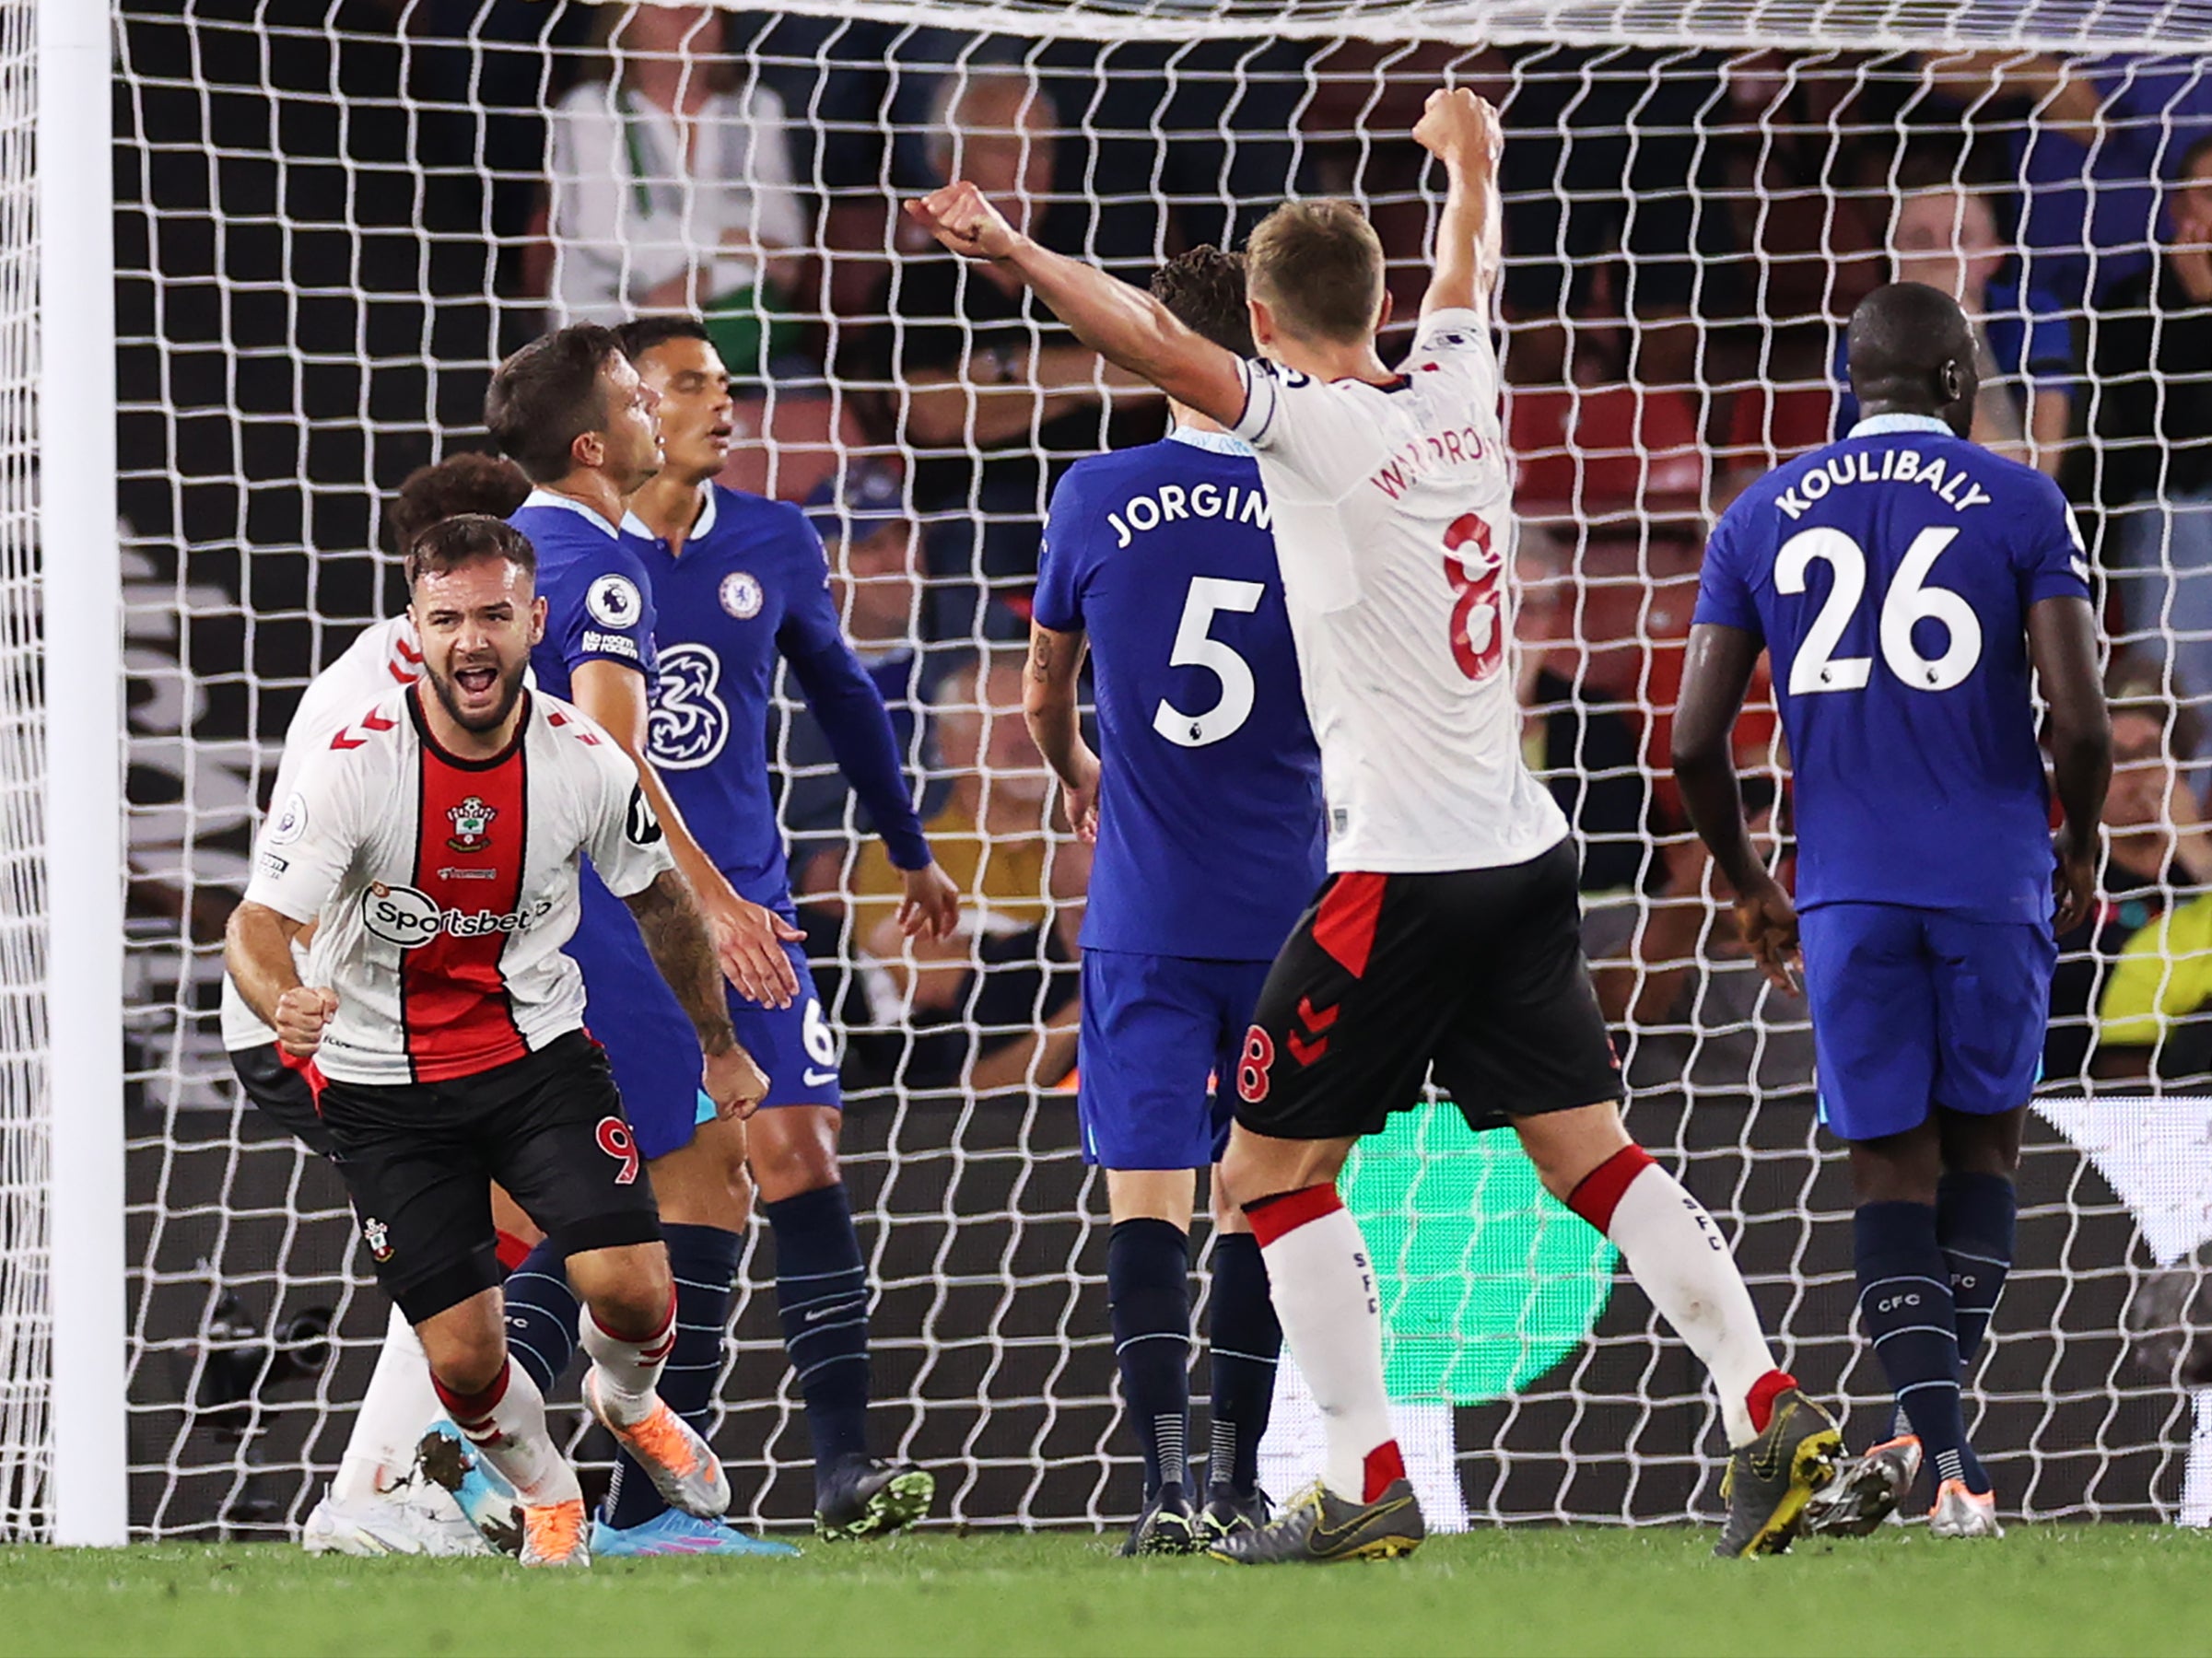 Southampton vs Chelsea result Final score, goals, highlights and Premier League match report The Independent